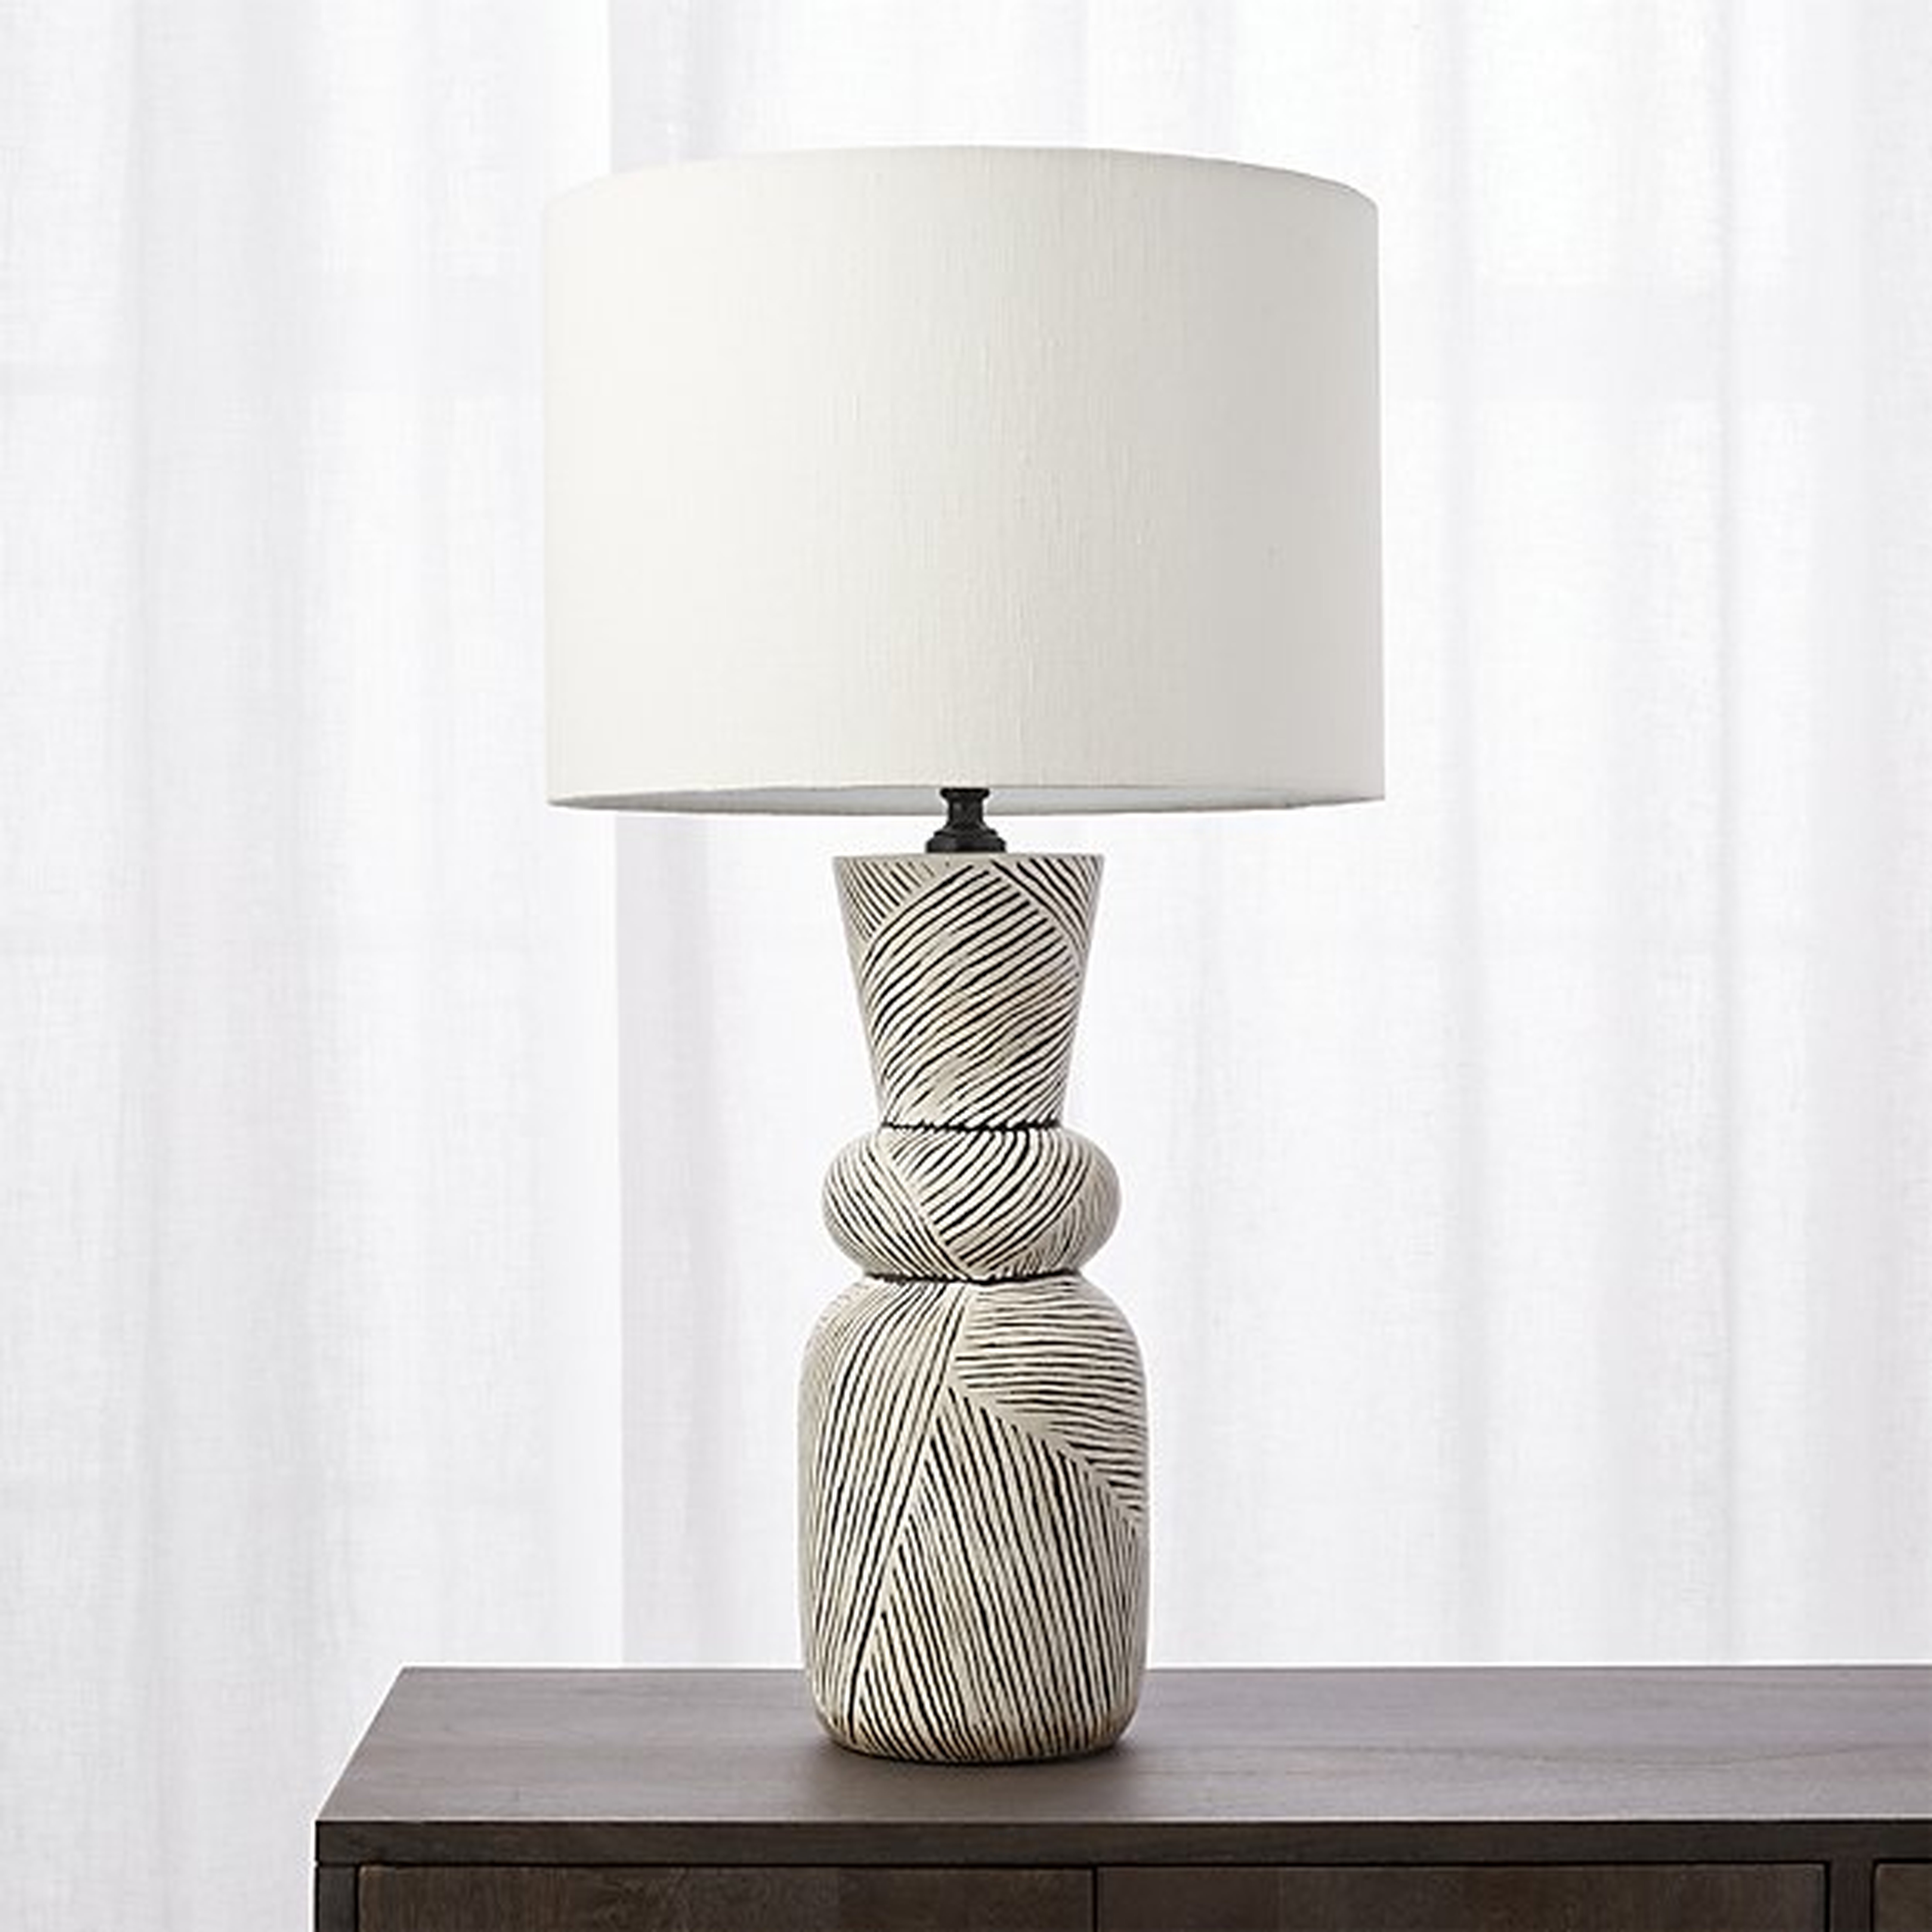 Ziggy Black and White Striped Table Lamp - CB2